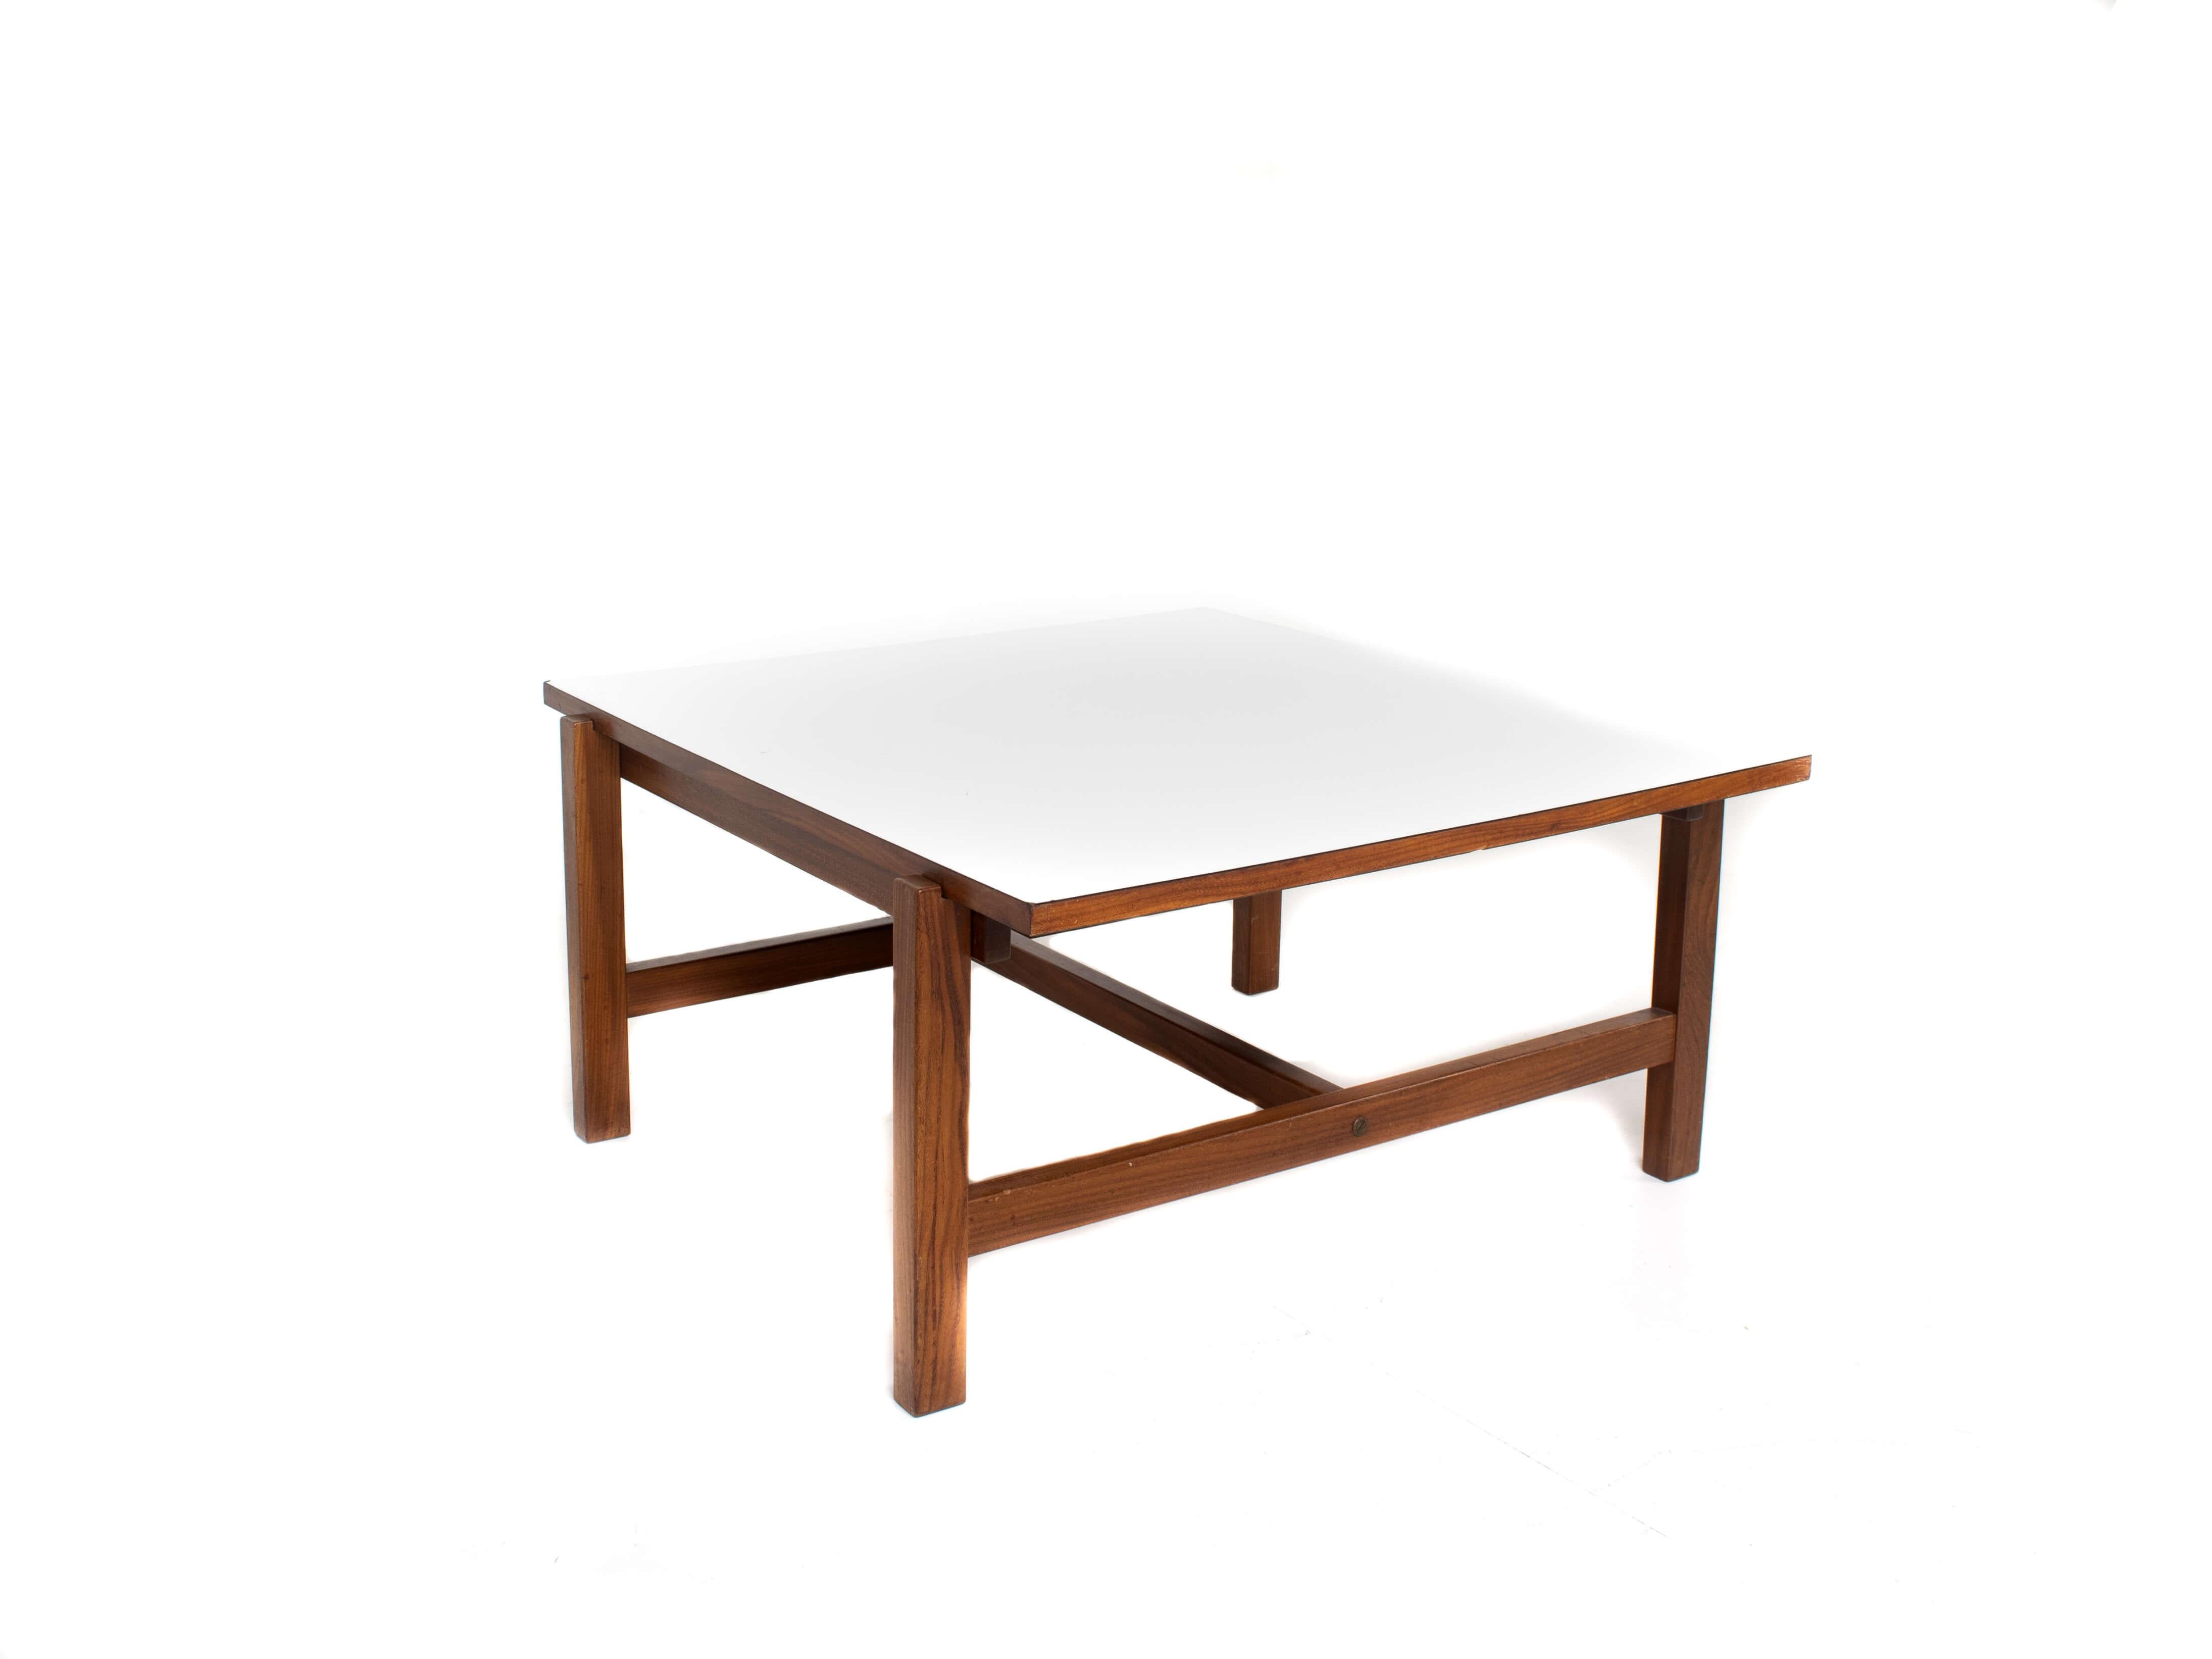 Dutch Pastoe Coffee Table Model TA 07 by Cees Braakman with Reversible Top For Sale